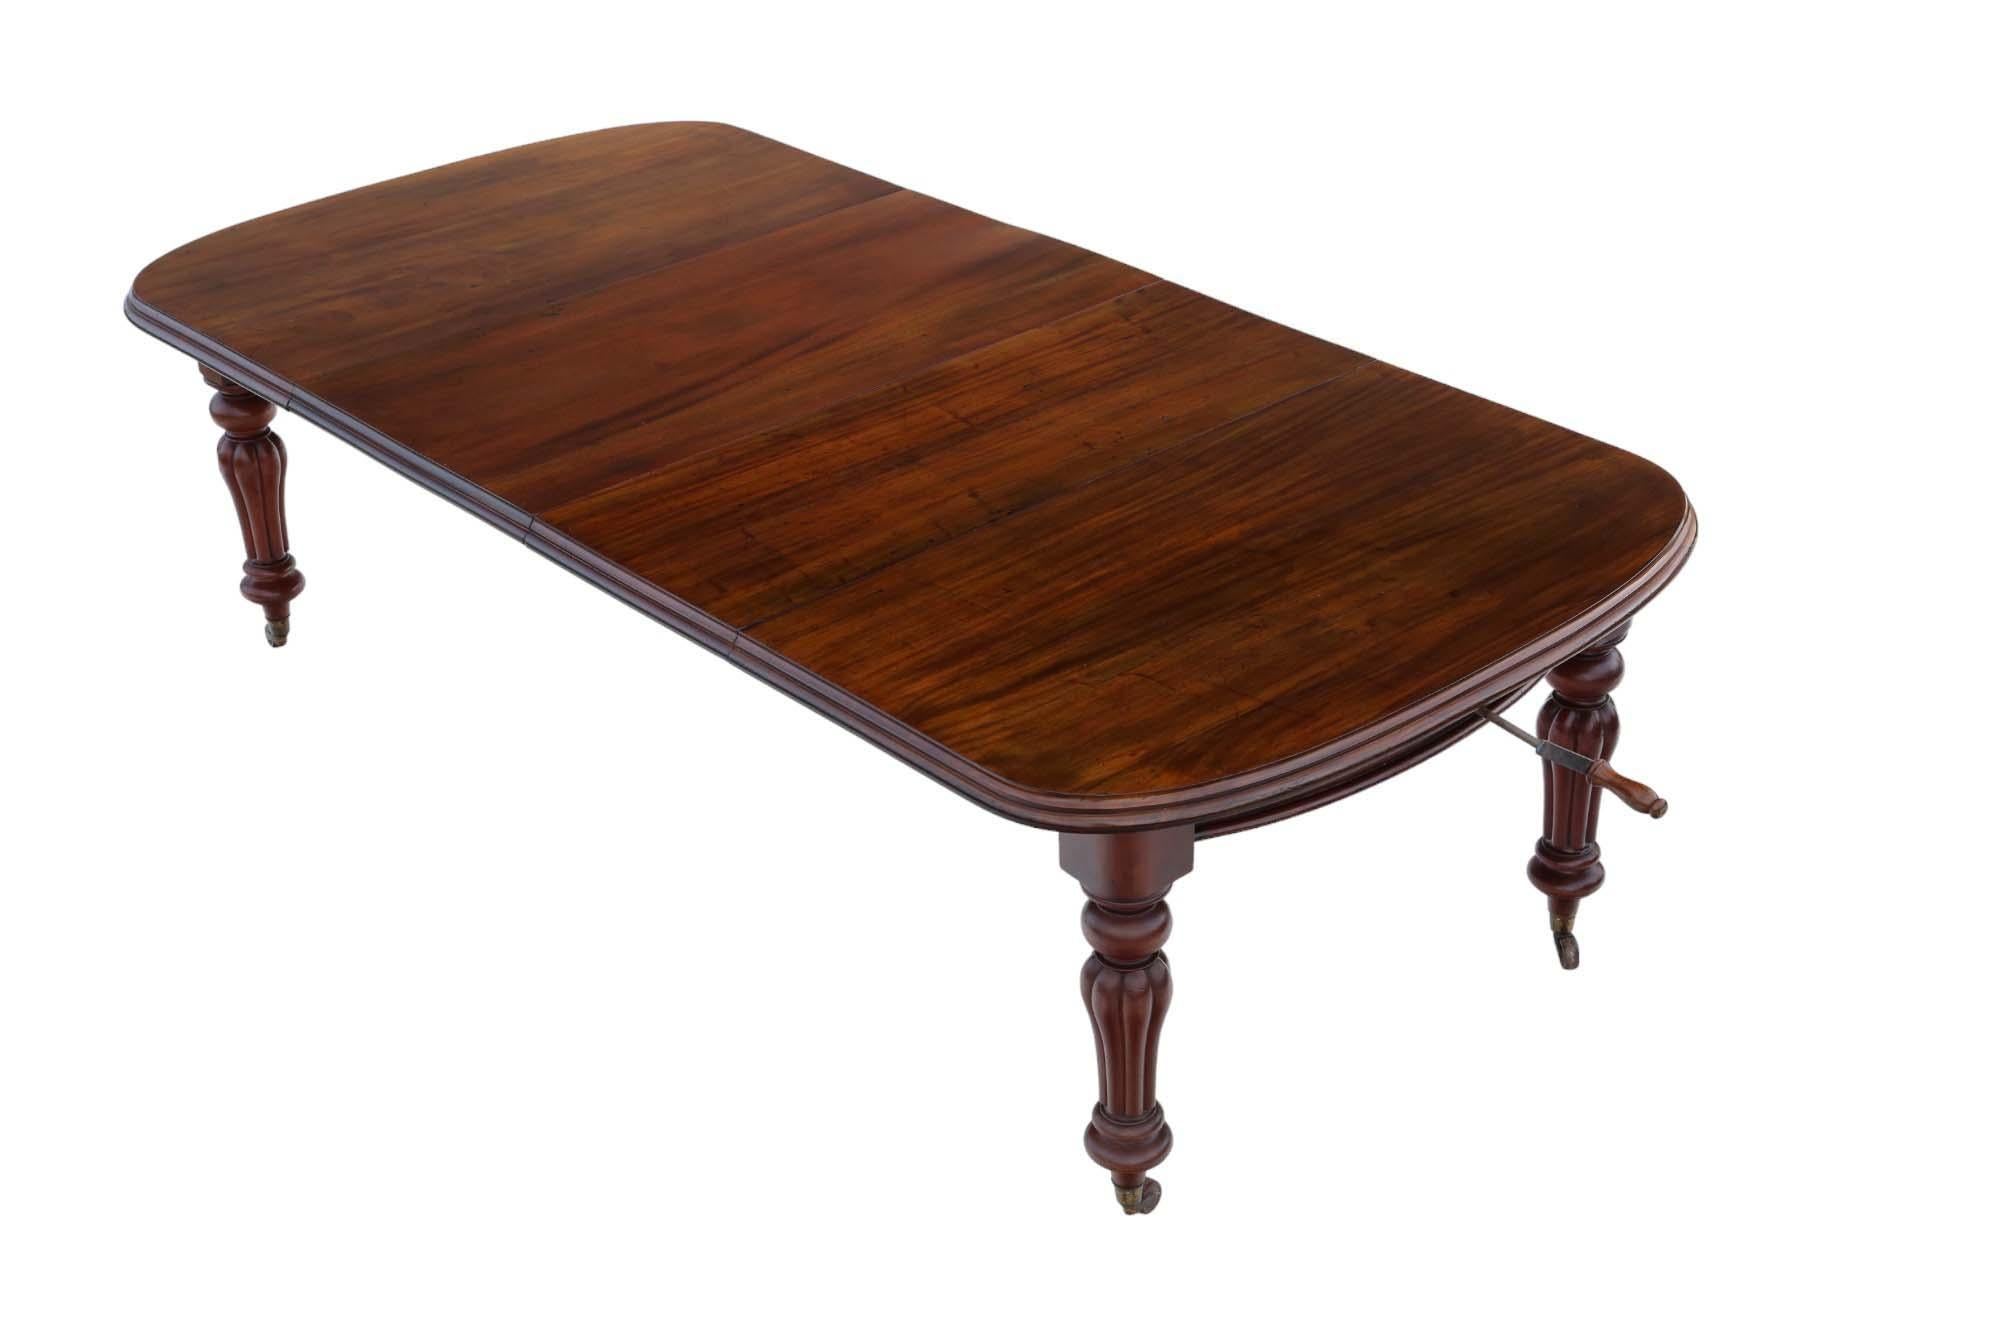 Antique Mid-19th Century Mahogany Wind-out Extending Dining Table - Large, Fine Quality (Approximately 8'1